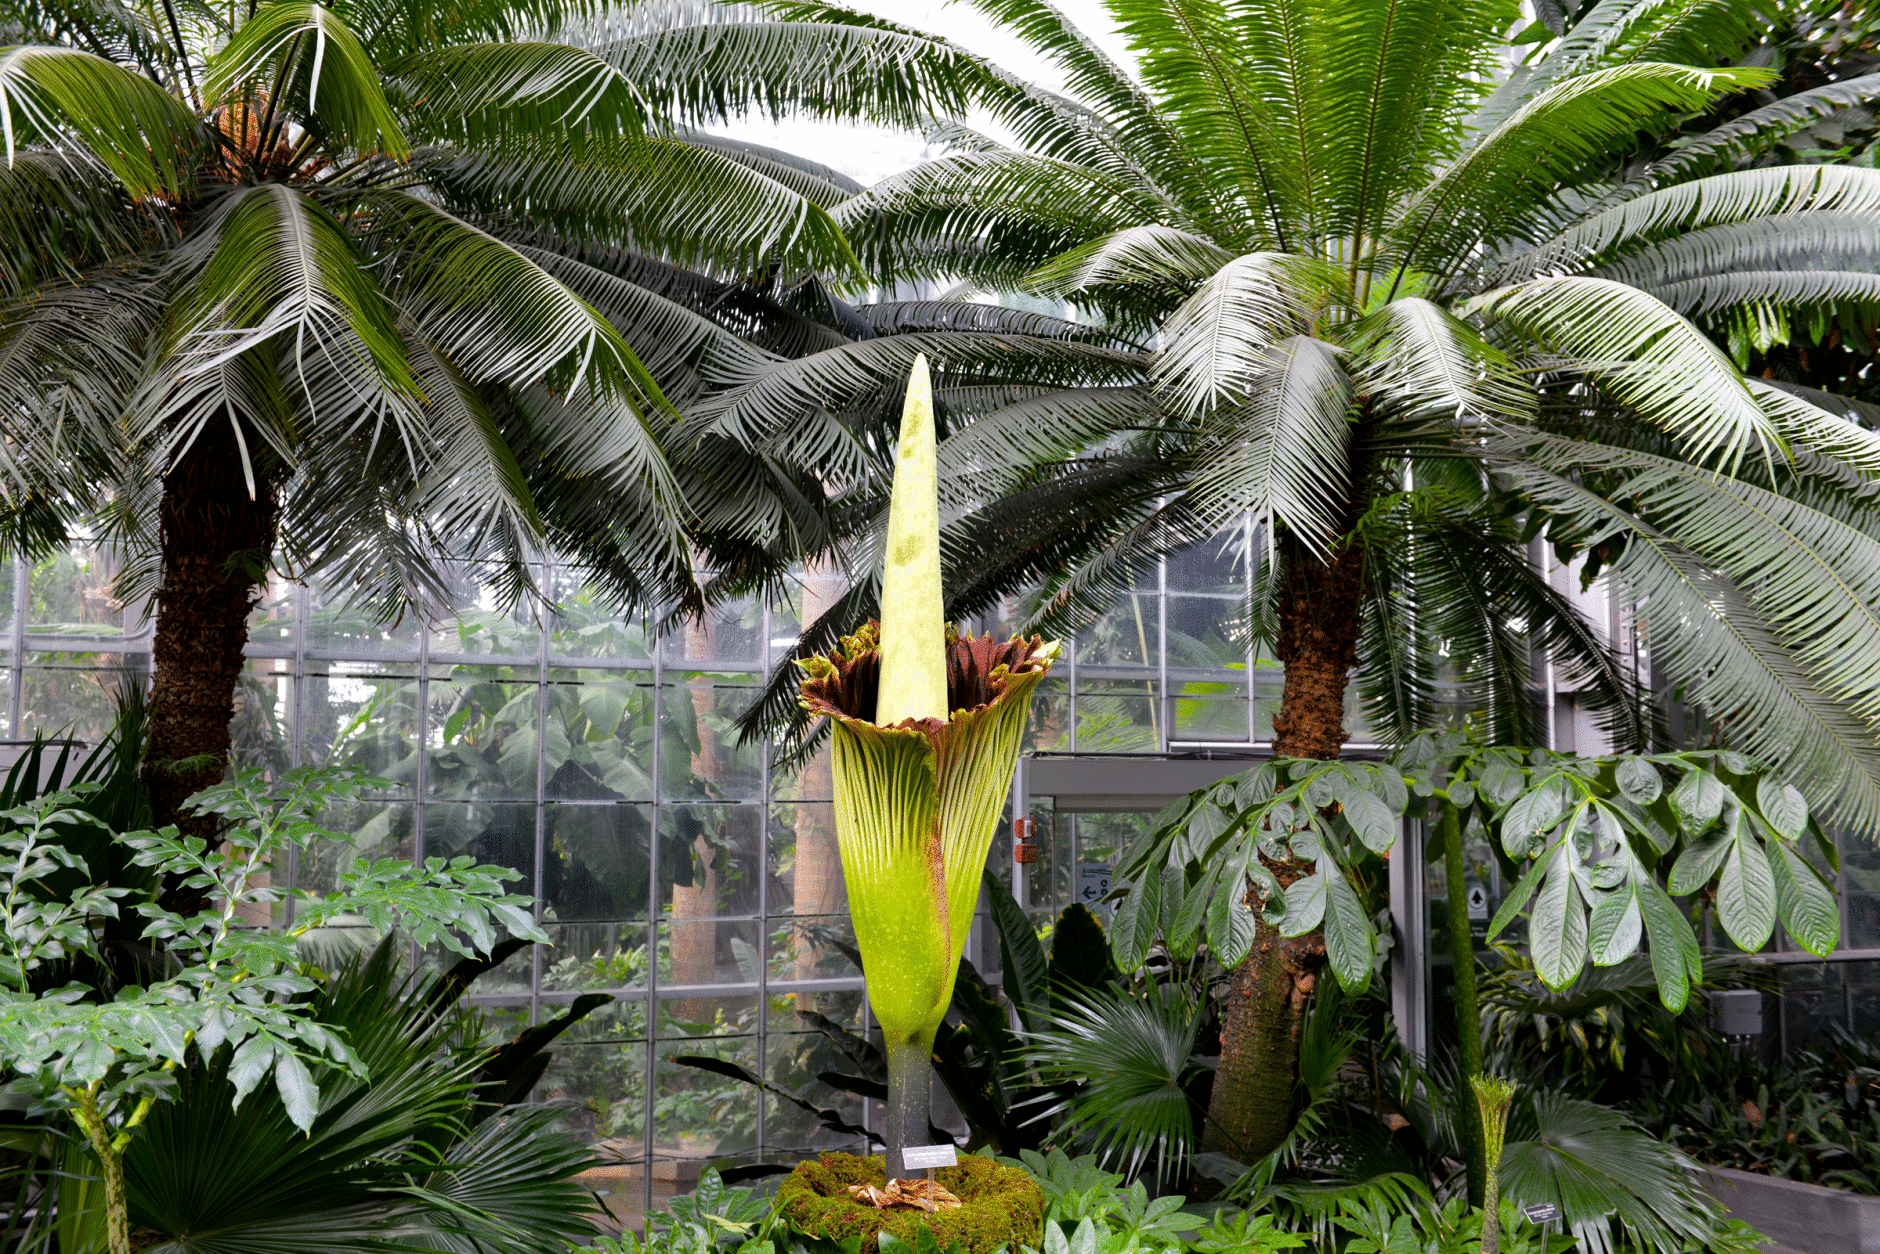 The corpse flower at the U.S. Botanic Garden blooms on the morning of Aug. 2, 2016. (Courtesy of the U.S. Botanic Garden)